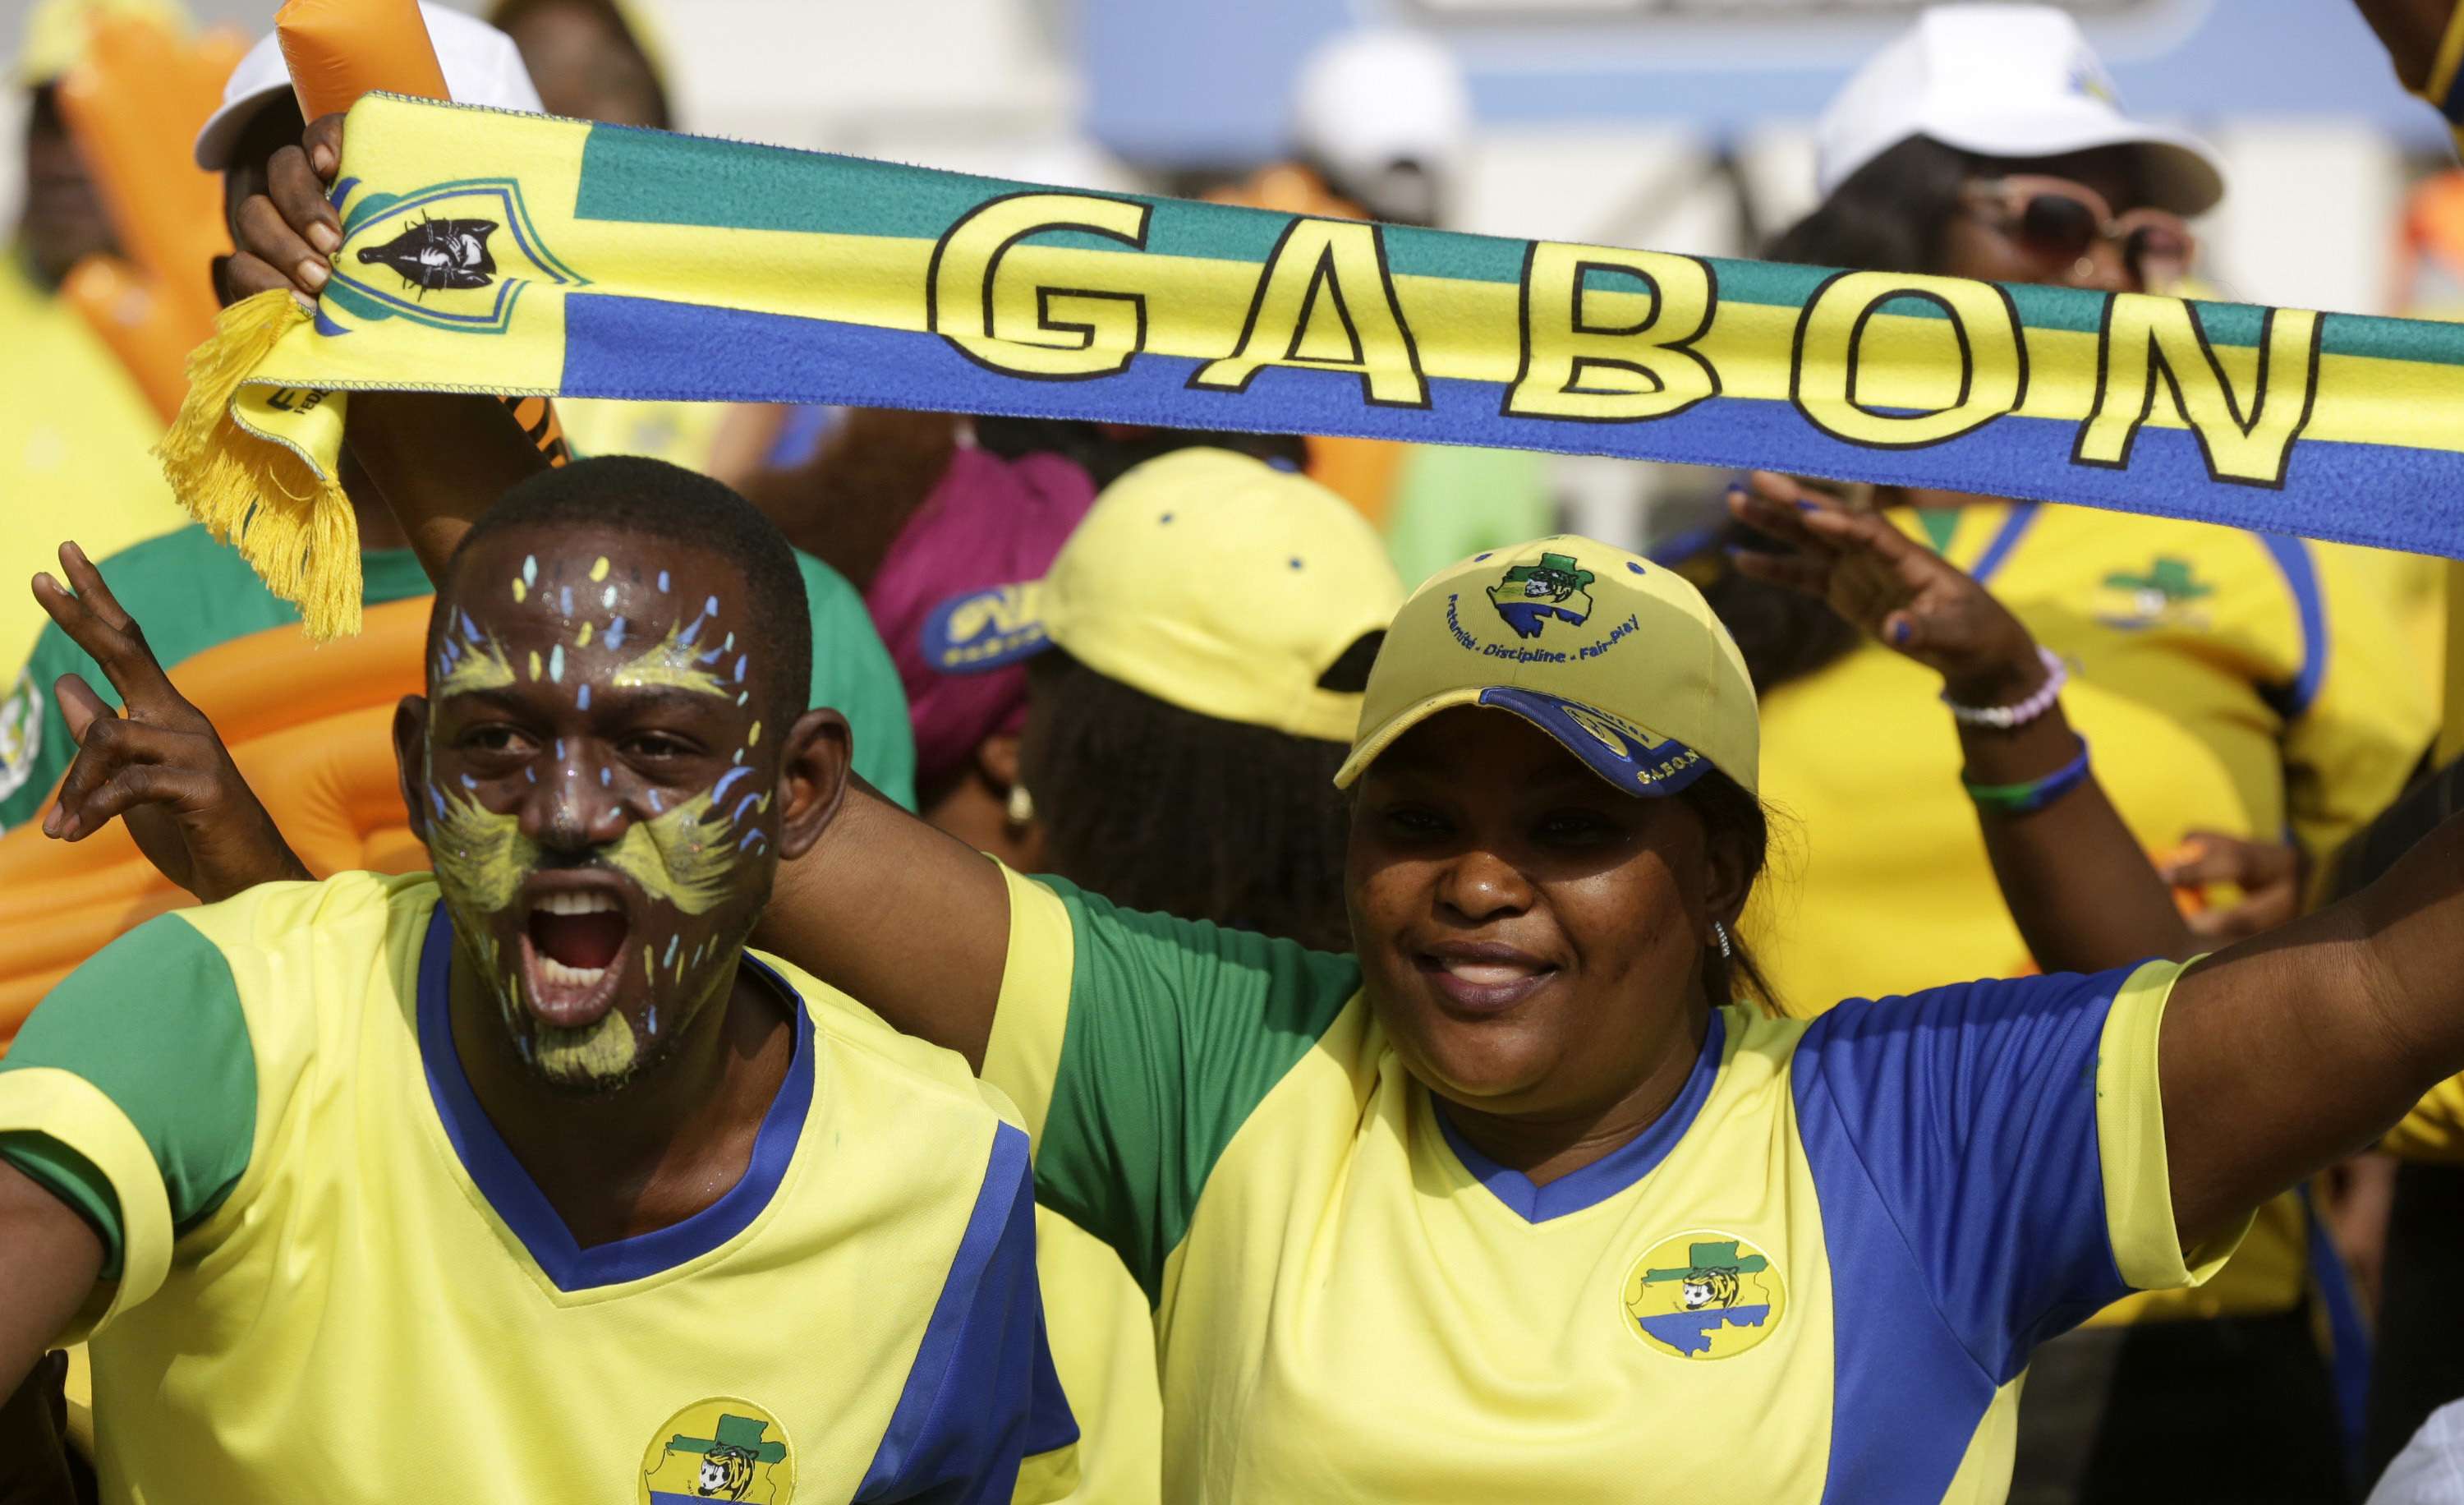 Gabon drew 1-1 with Burkina Faso at the Stade de l'Amitie in Libreville on Wednesday. Photo: AP